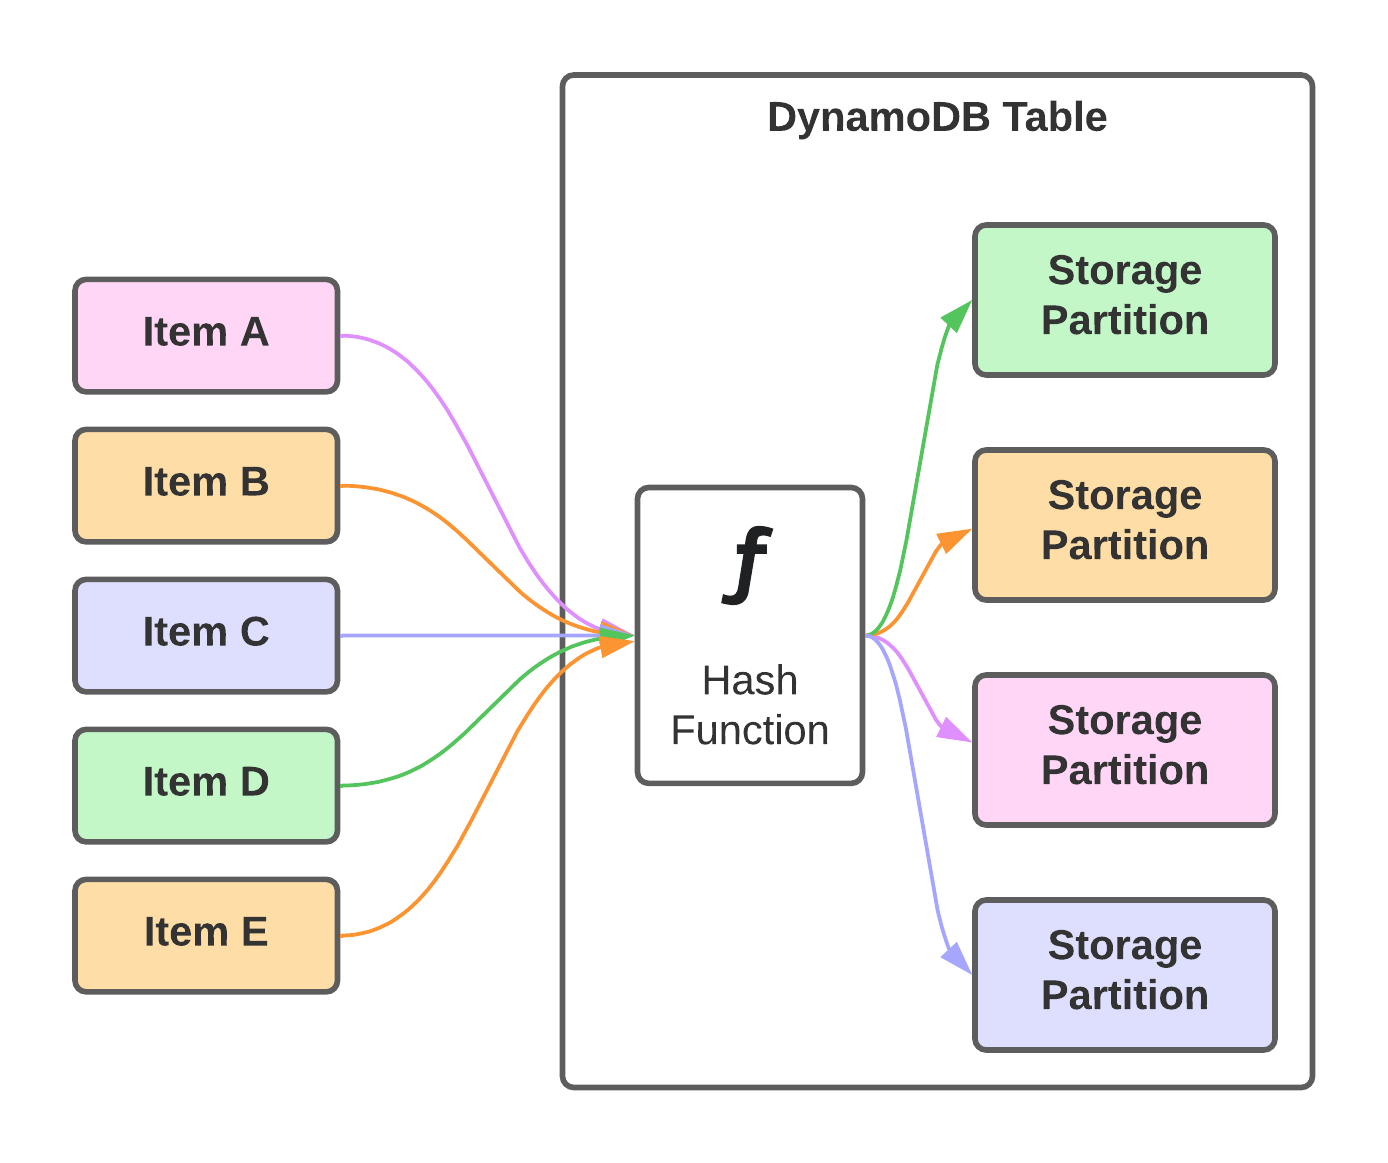 Table and Storage Partitions